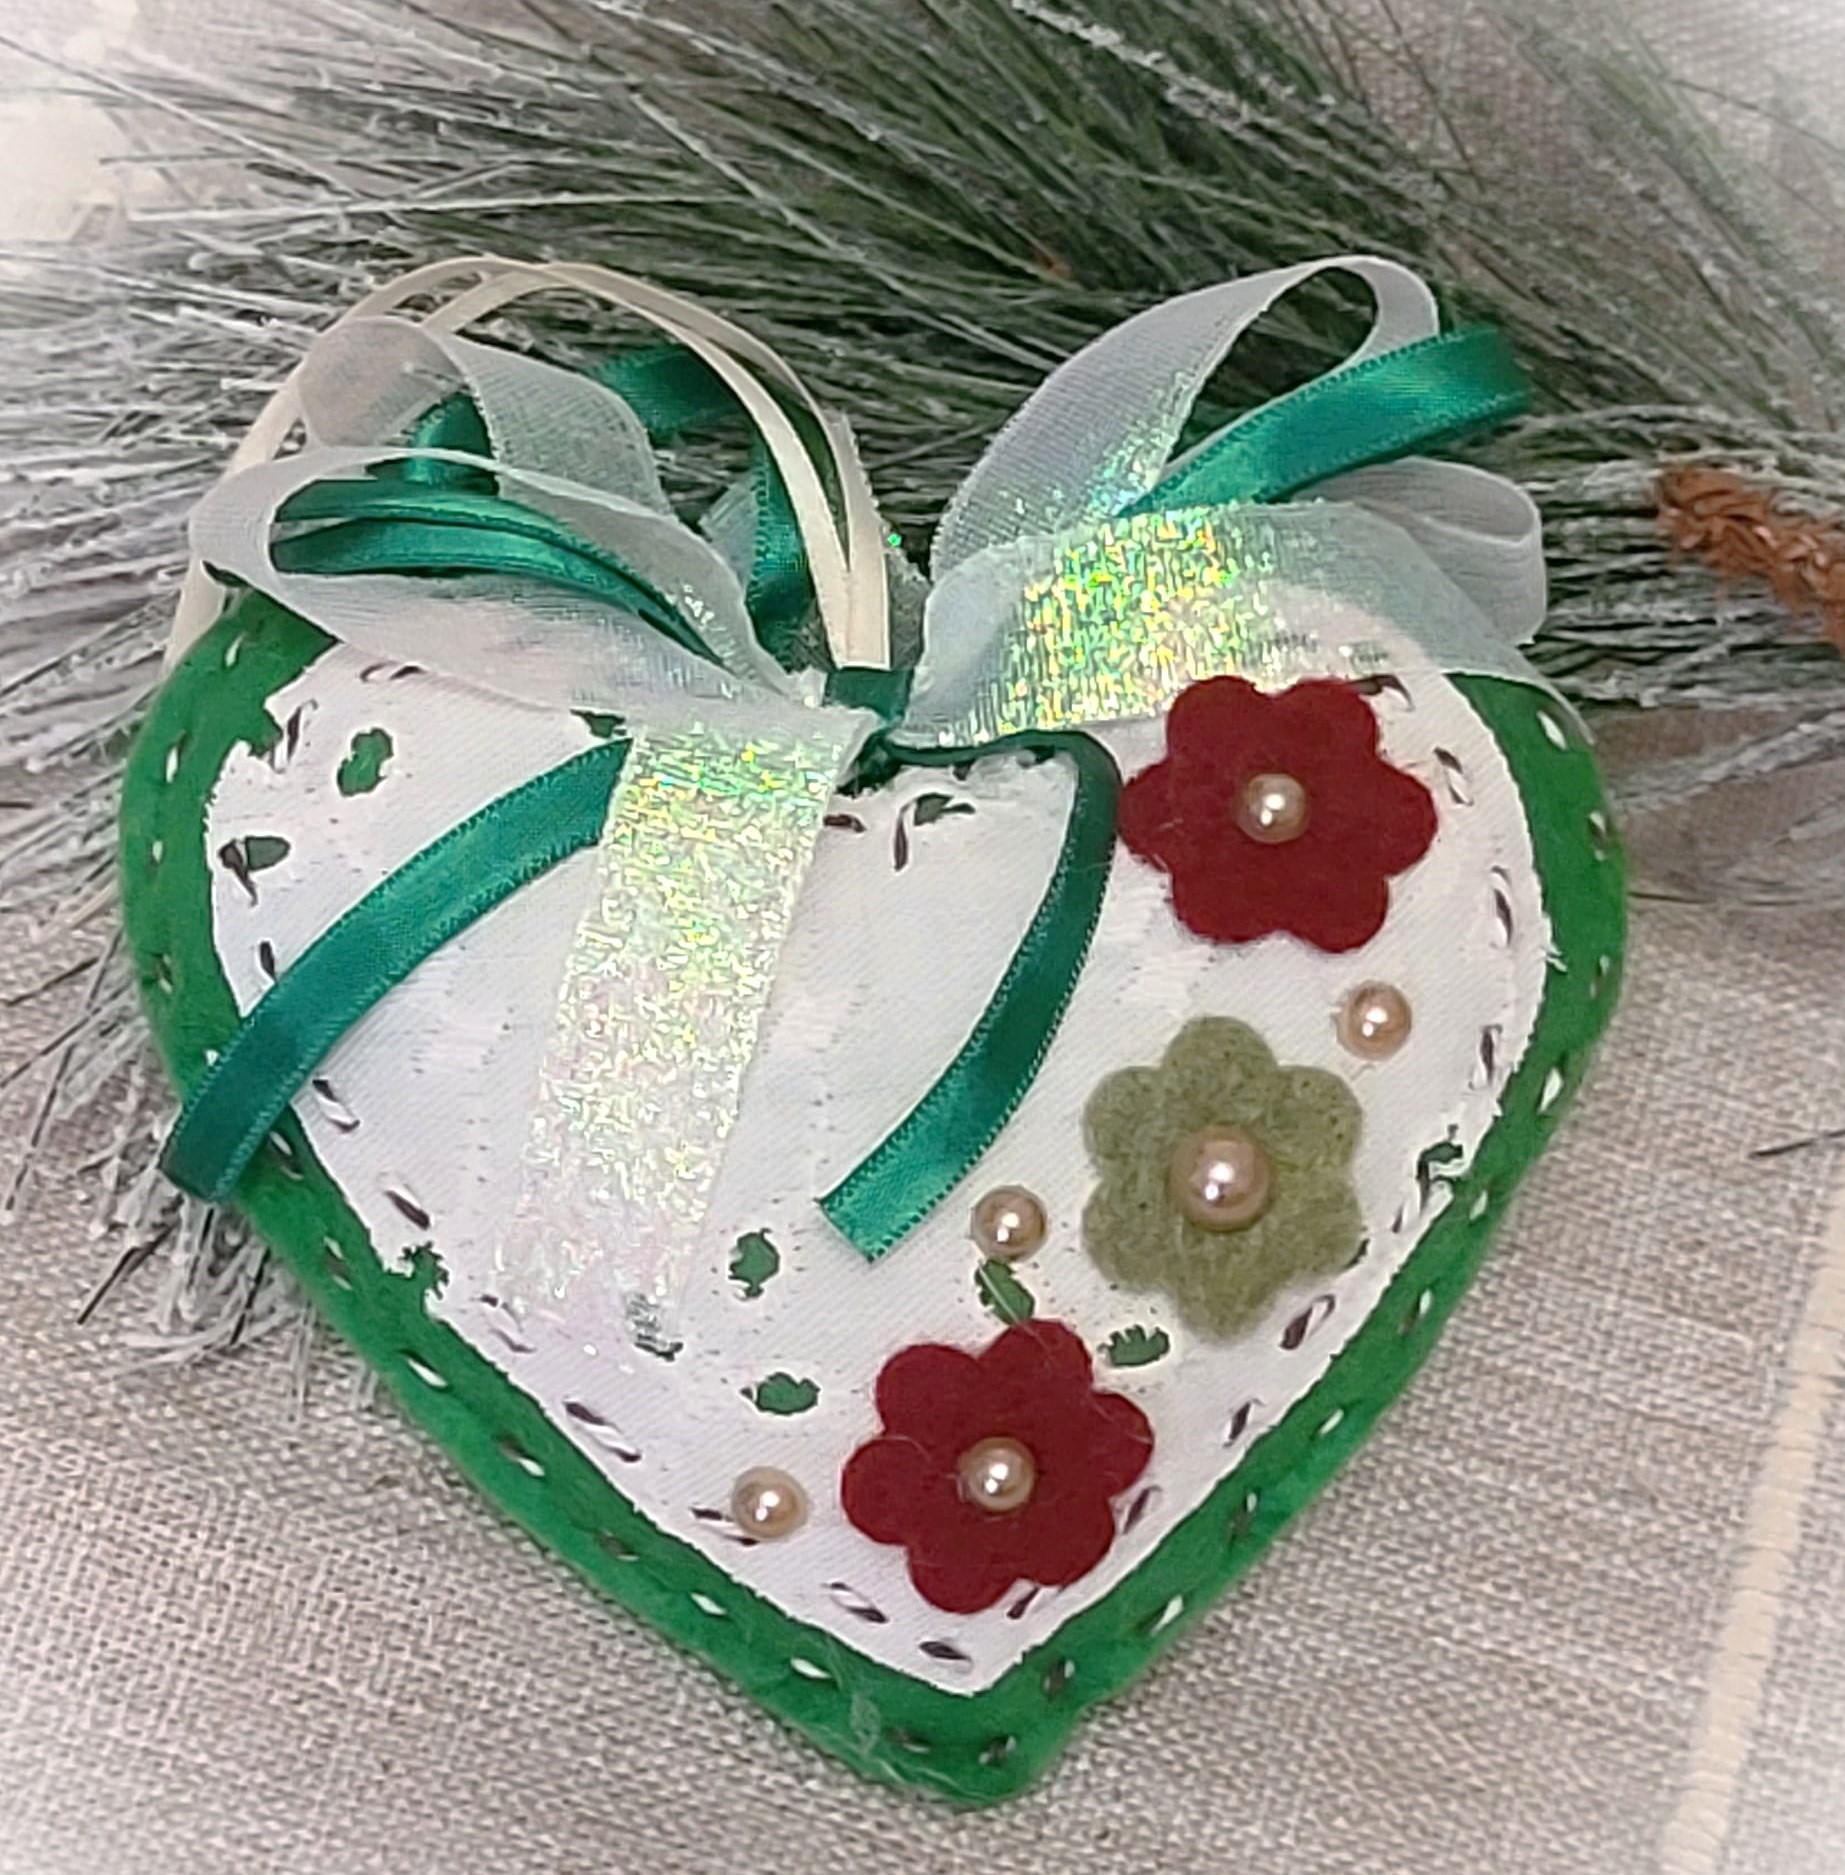 Felt Spring heart ornament with lace and burgundy flowers